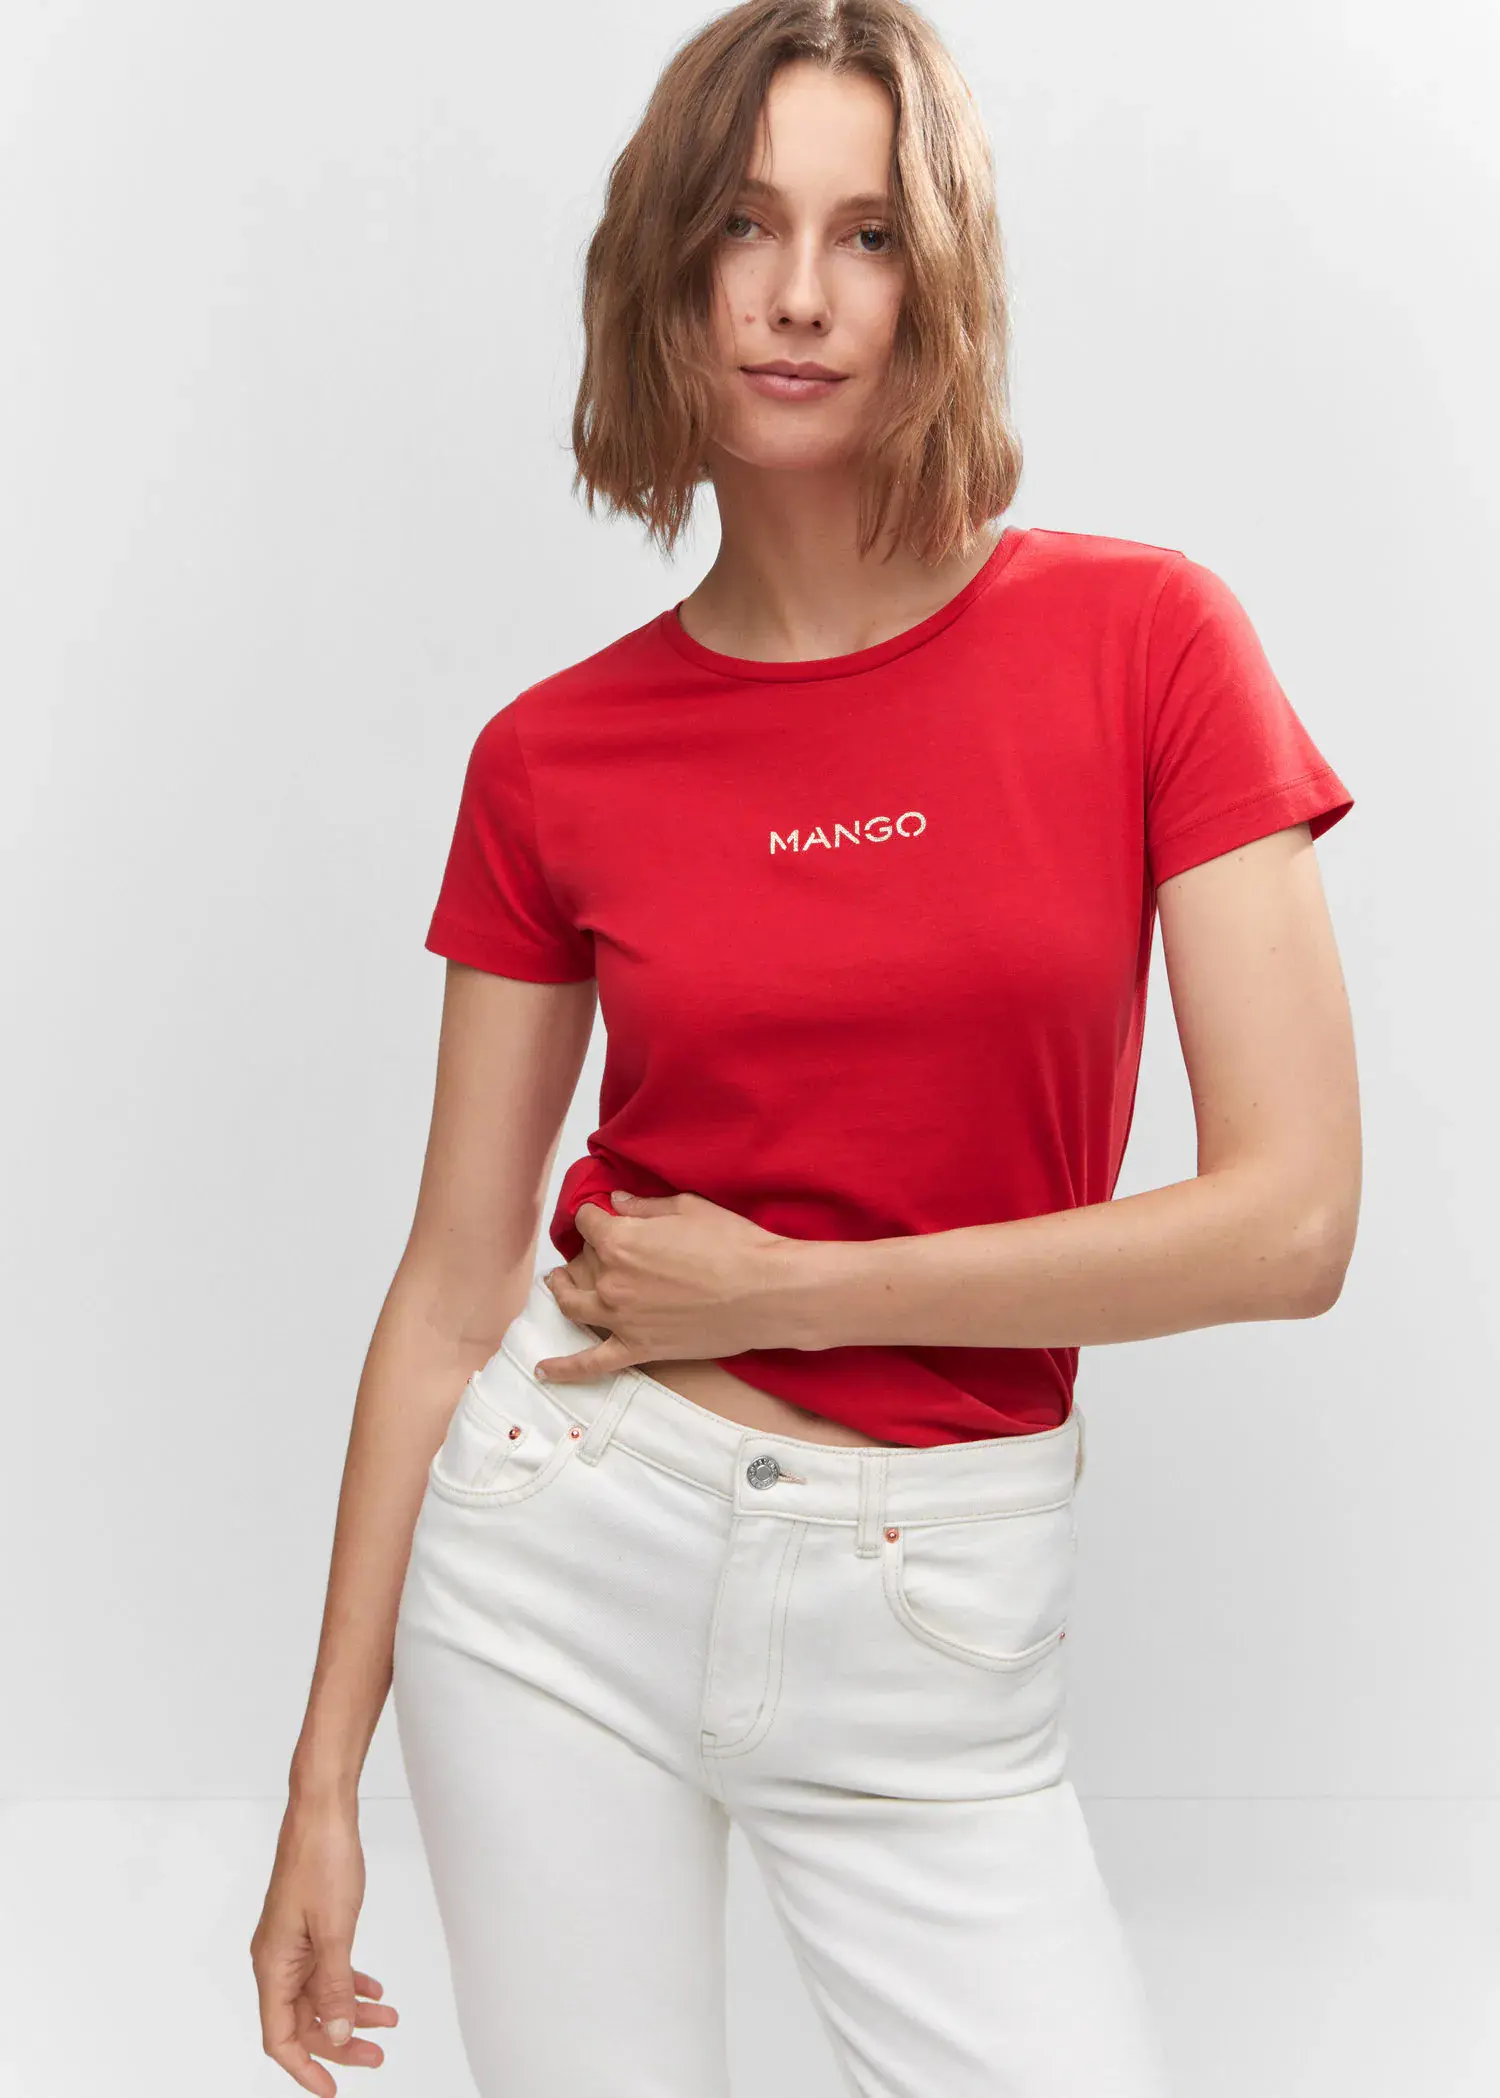 Mango Metallic logo T-shirt. a woman in a red shirt and white jeans. 